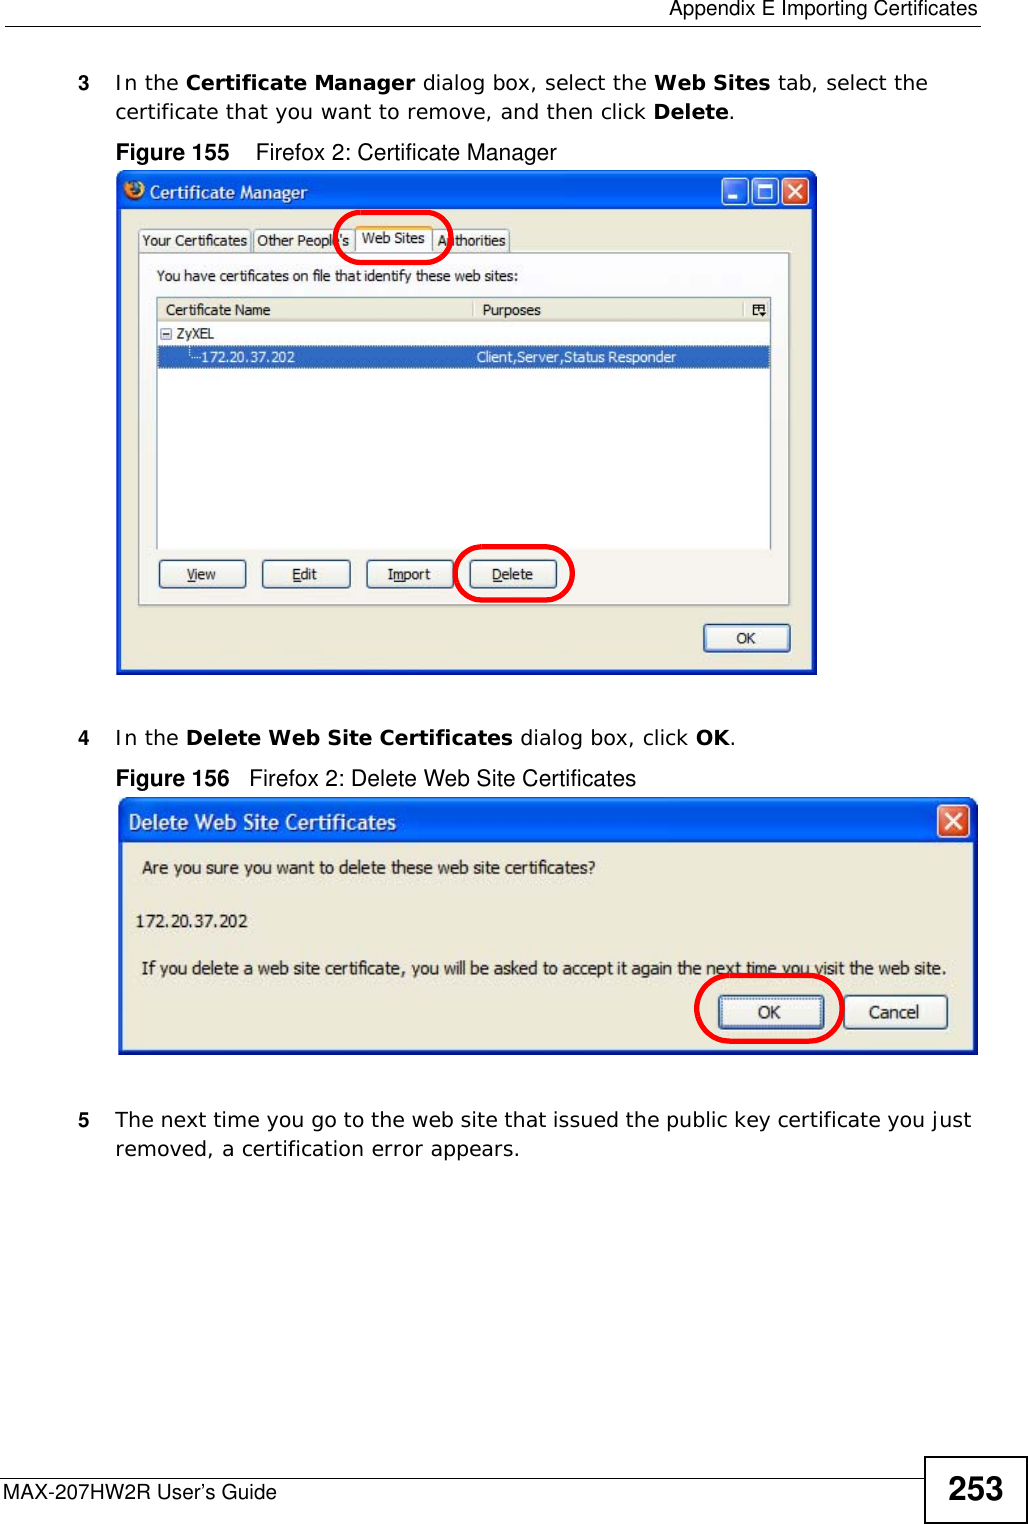  Appendix E Importing CertificatesMAX-207HW2R User’s Guide 2533In the Certificate Manager dialog box, select the Web Sites tab, select the certificate that you want to remove, and then click Delete.Figure 155    Firefox 2: Certificate Manager4In the Delete Web Site Certificates dialog box, click OK.Figure 156   Firefox 2: Delete Web Site Certificates5The next time you go to the web site that issued the public key certificate you just removed, a certification error appears.